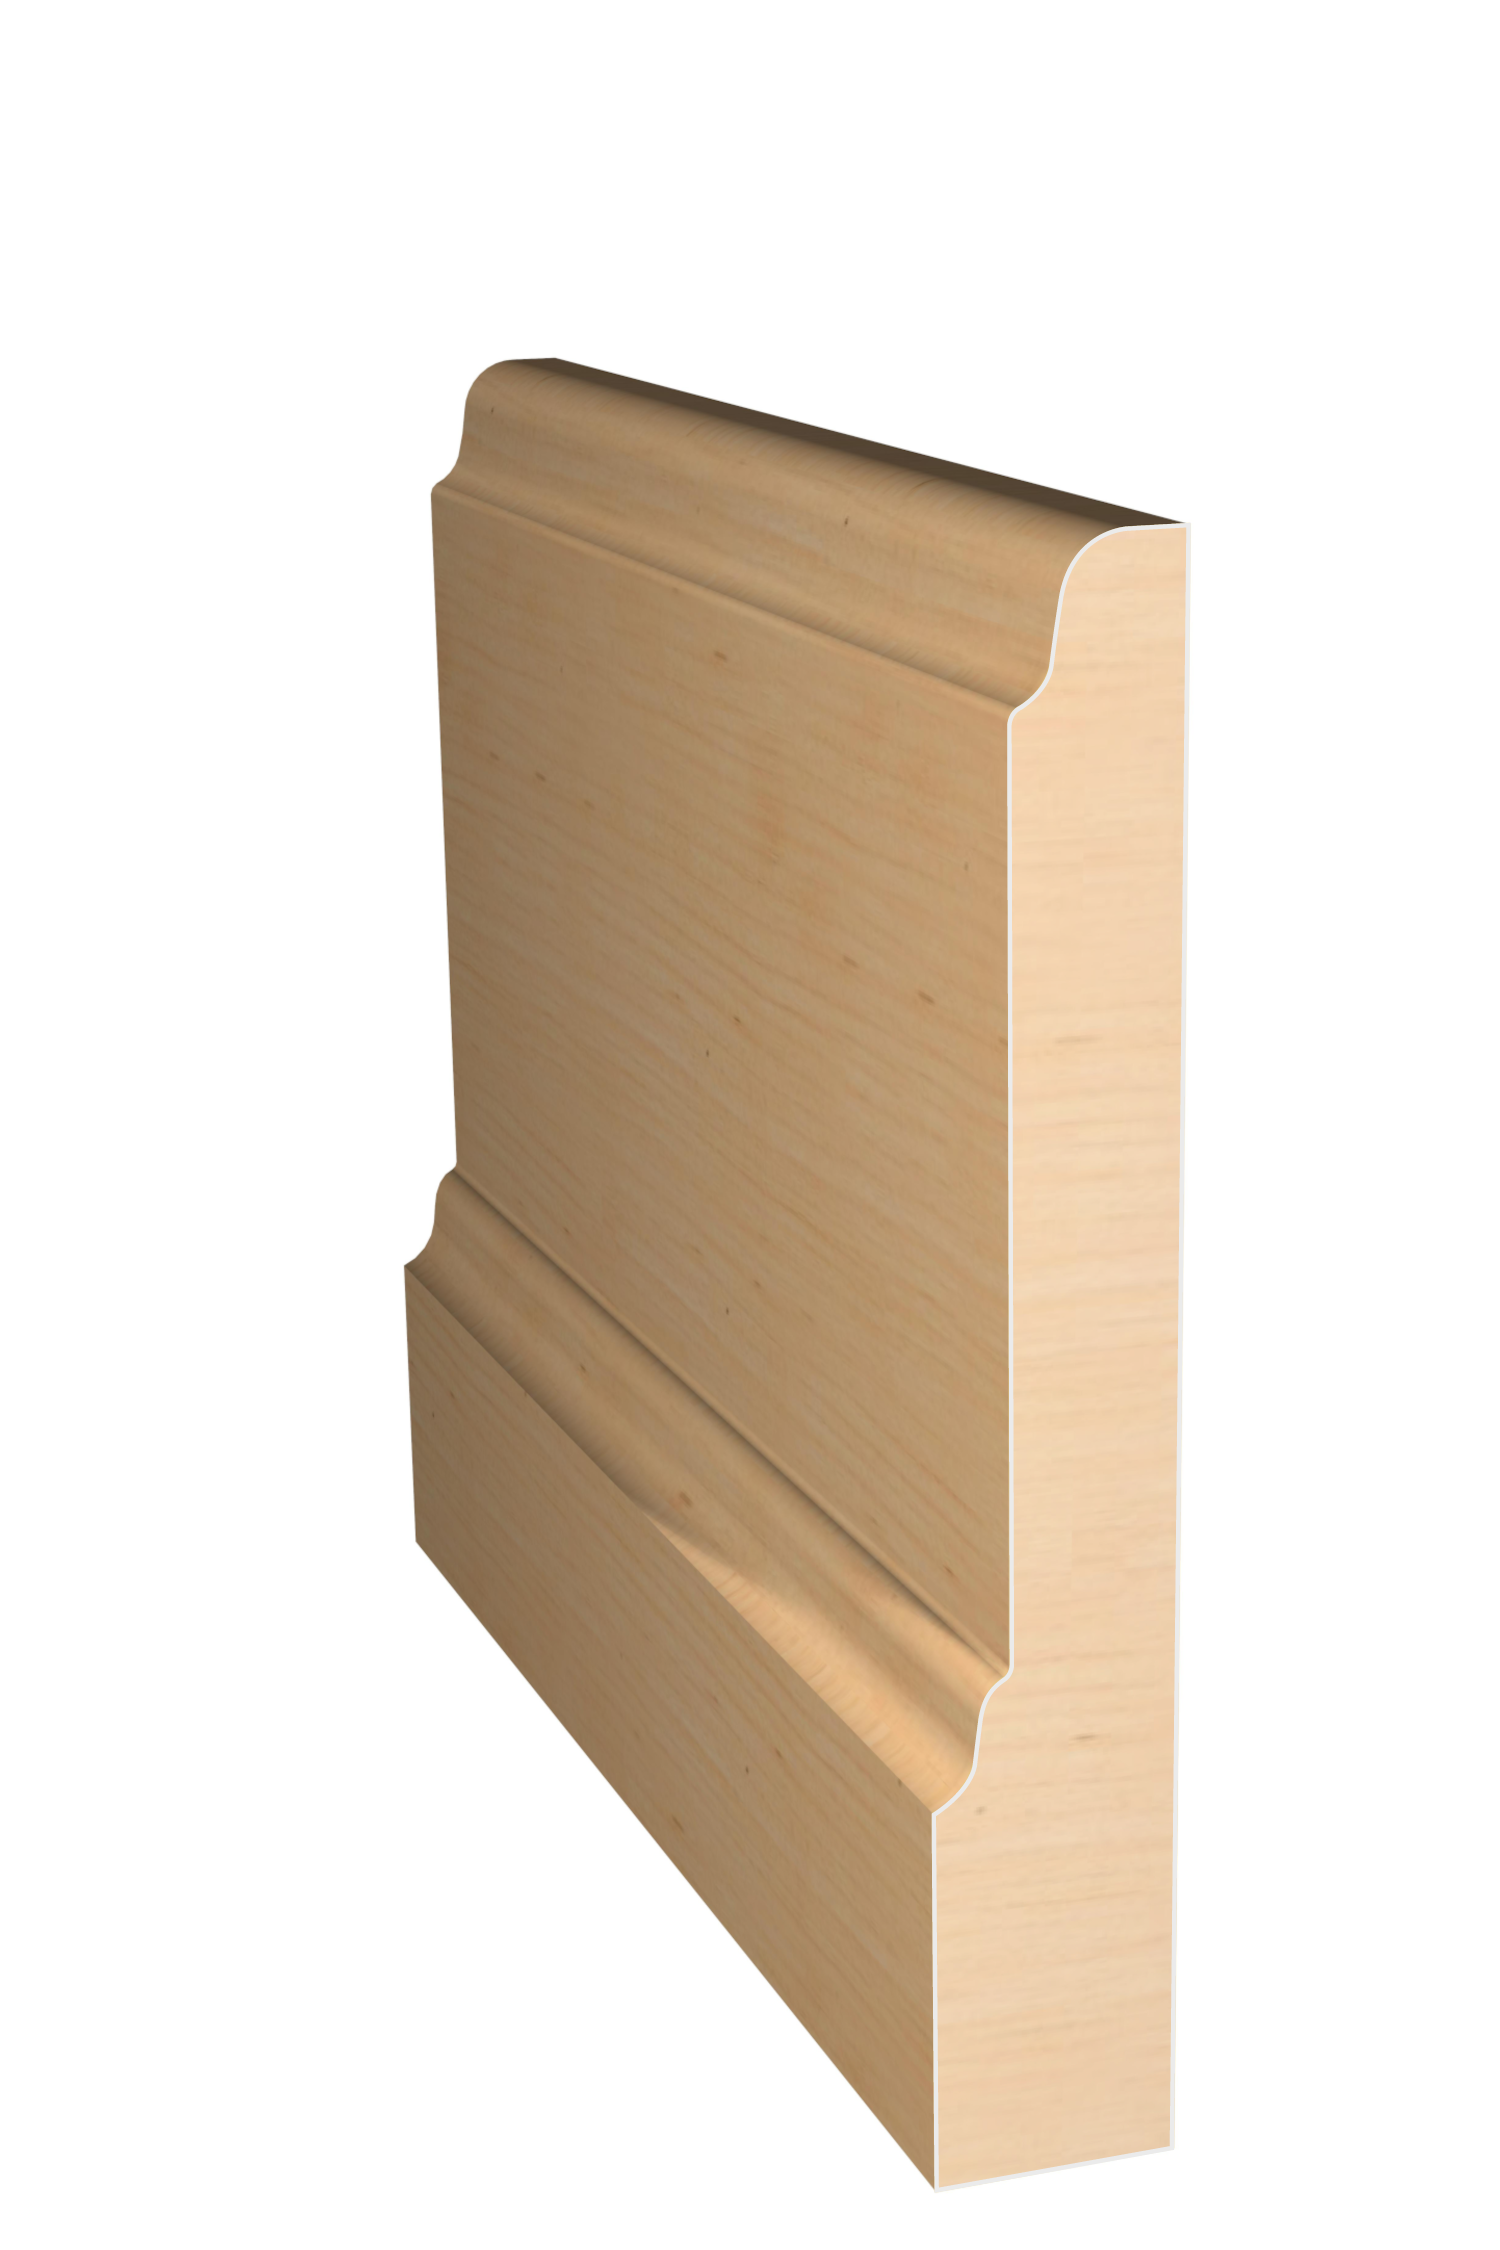 Three dimensional rendering of custom base wood molding BAPL4342 made by Public Lumber Company in Detroit.